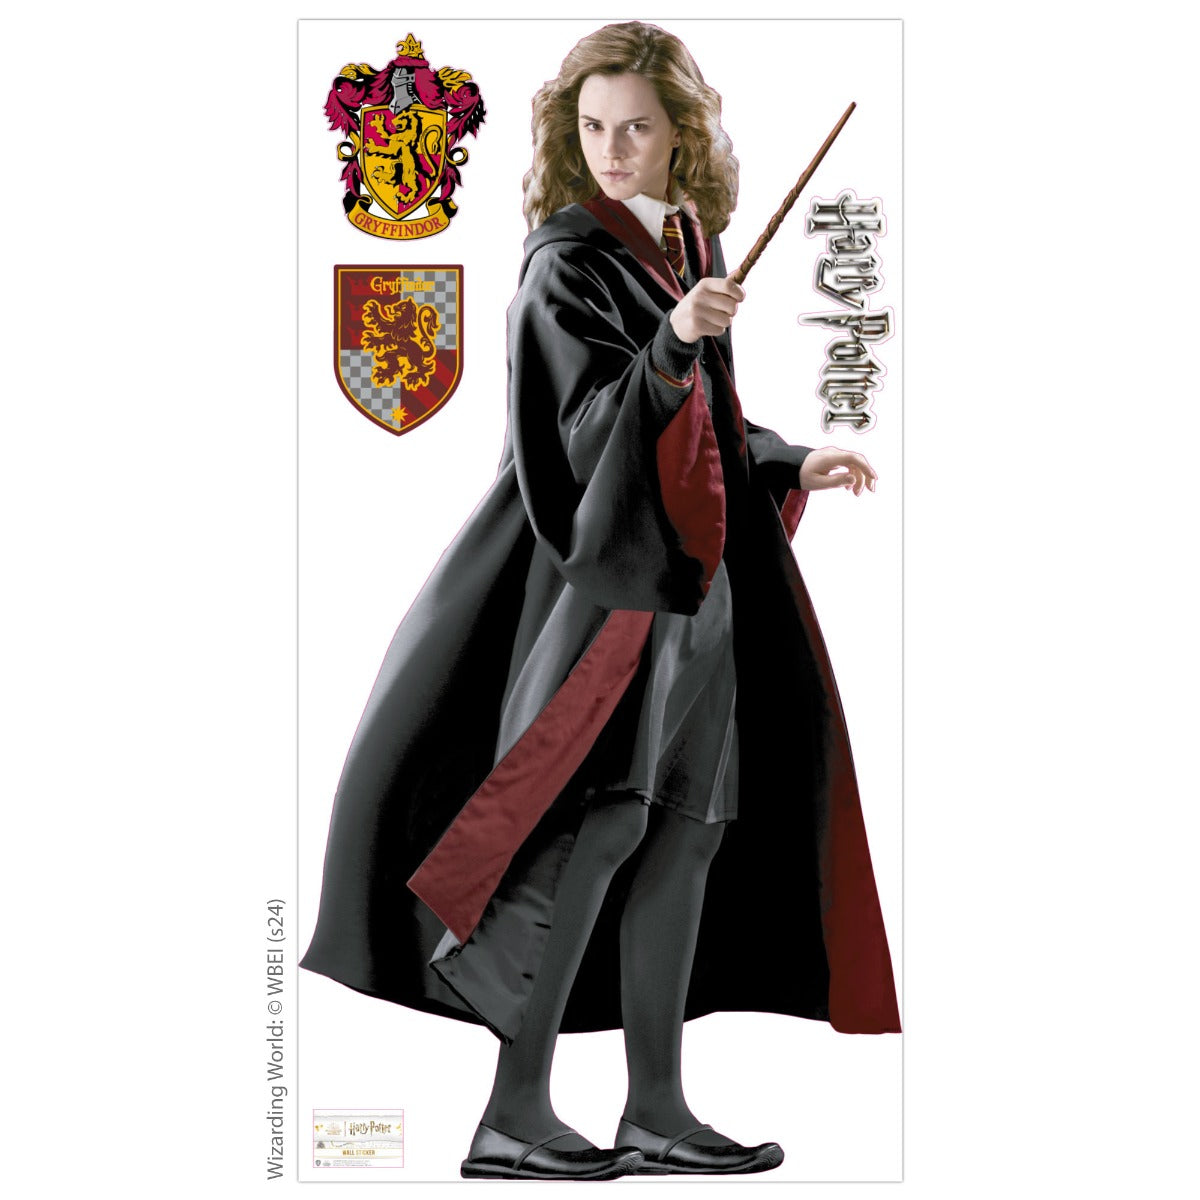 HARRY POTTER Wall Sticker - Hermione Granger 5th Year Cut Out Wall Decal Wizarding World Art